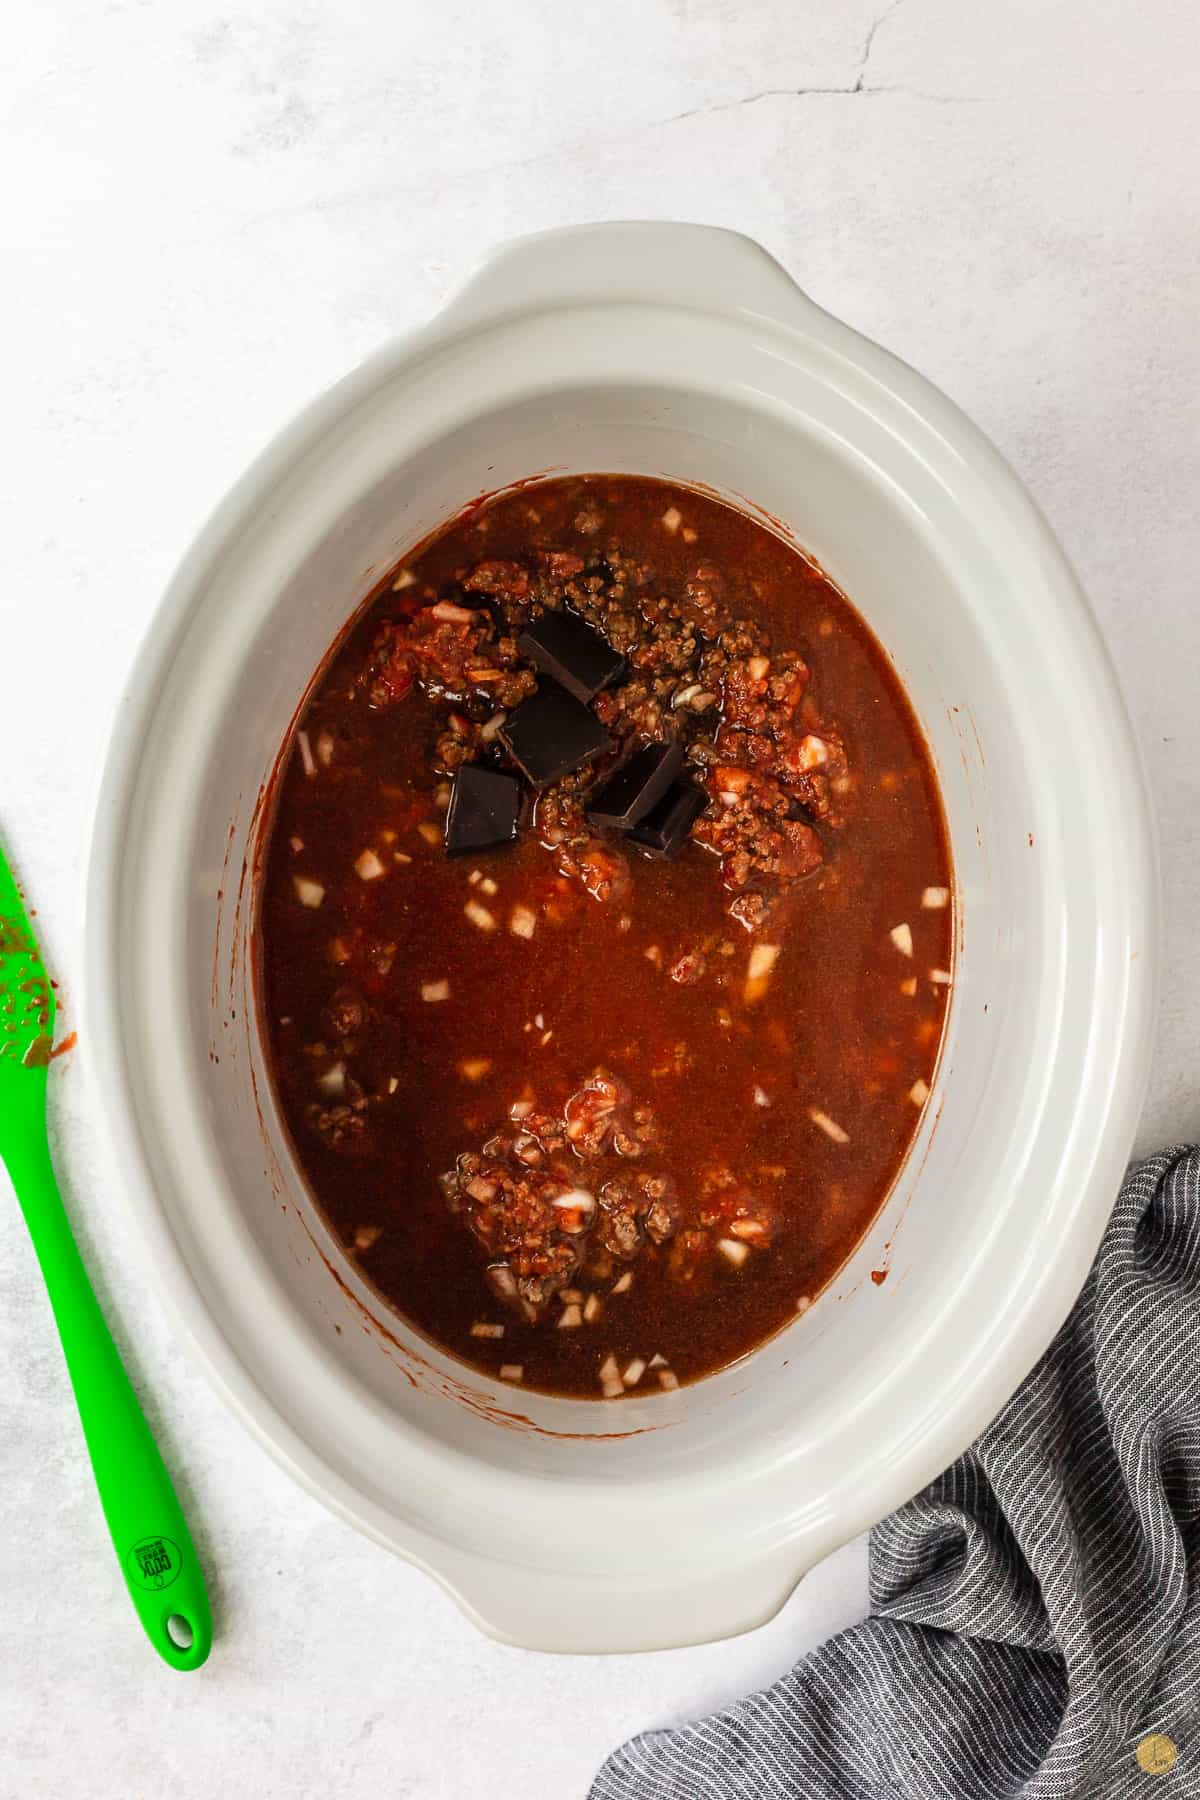 uncooked chili in a crockpot